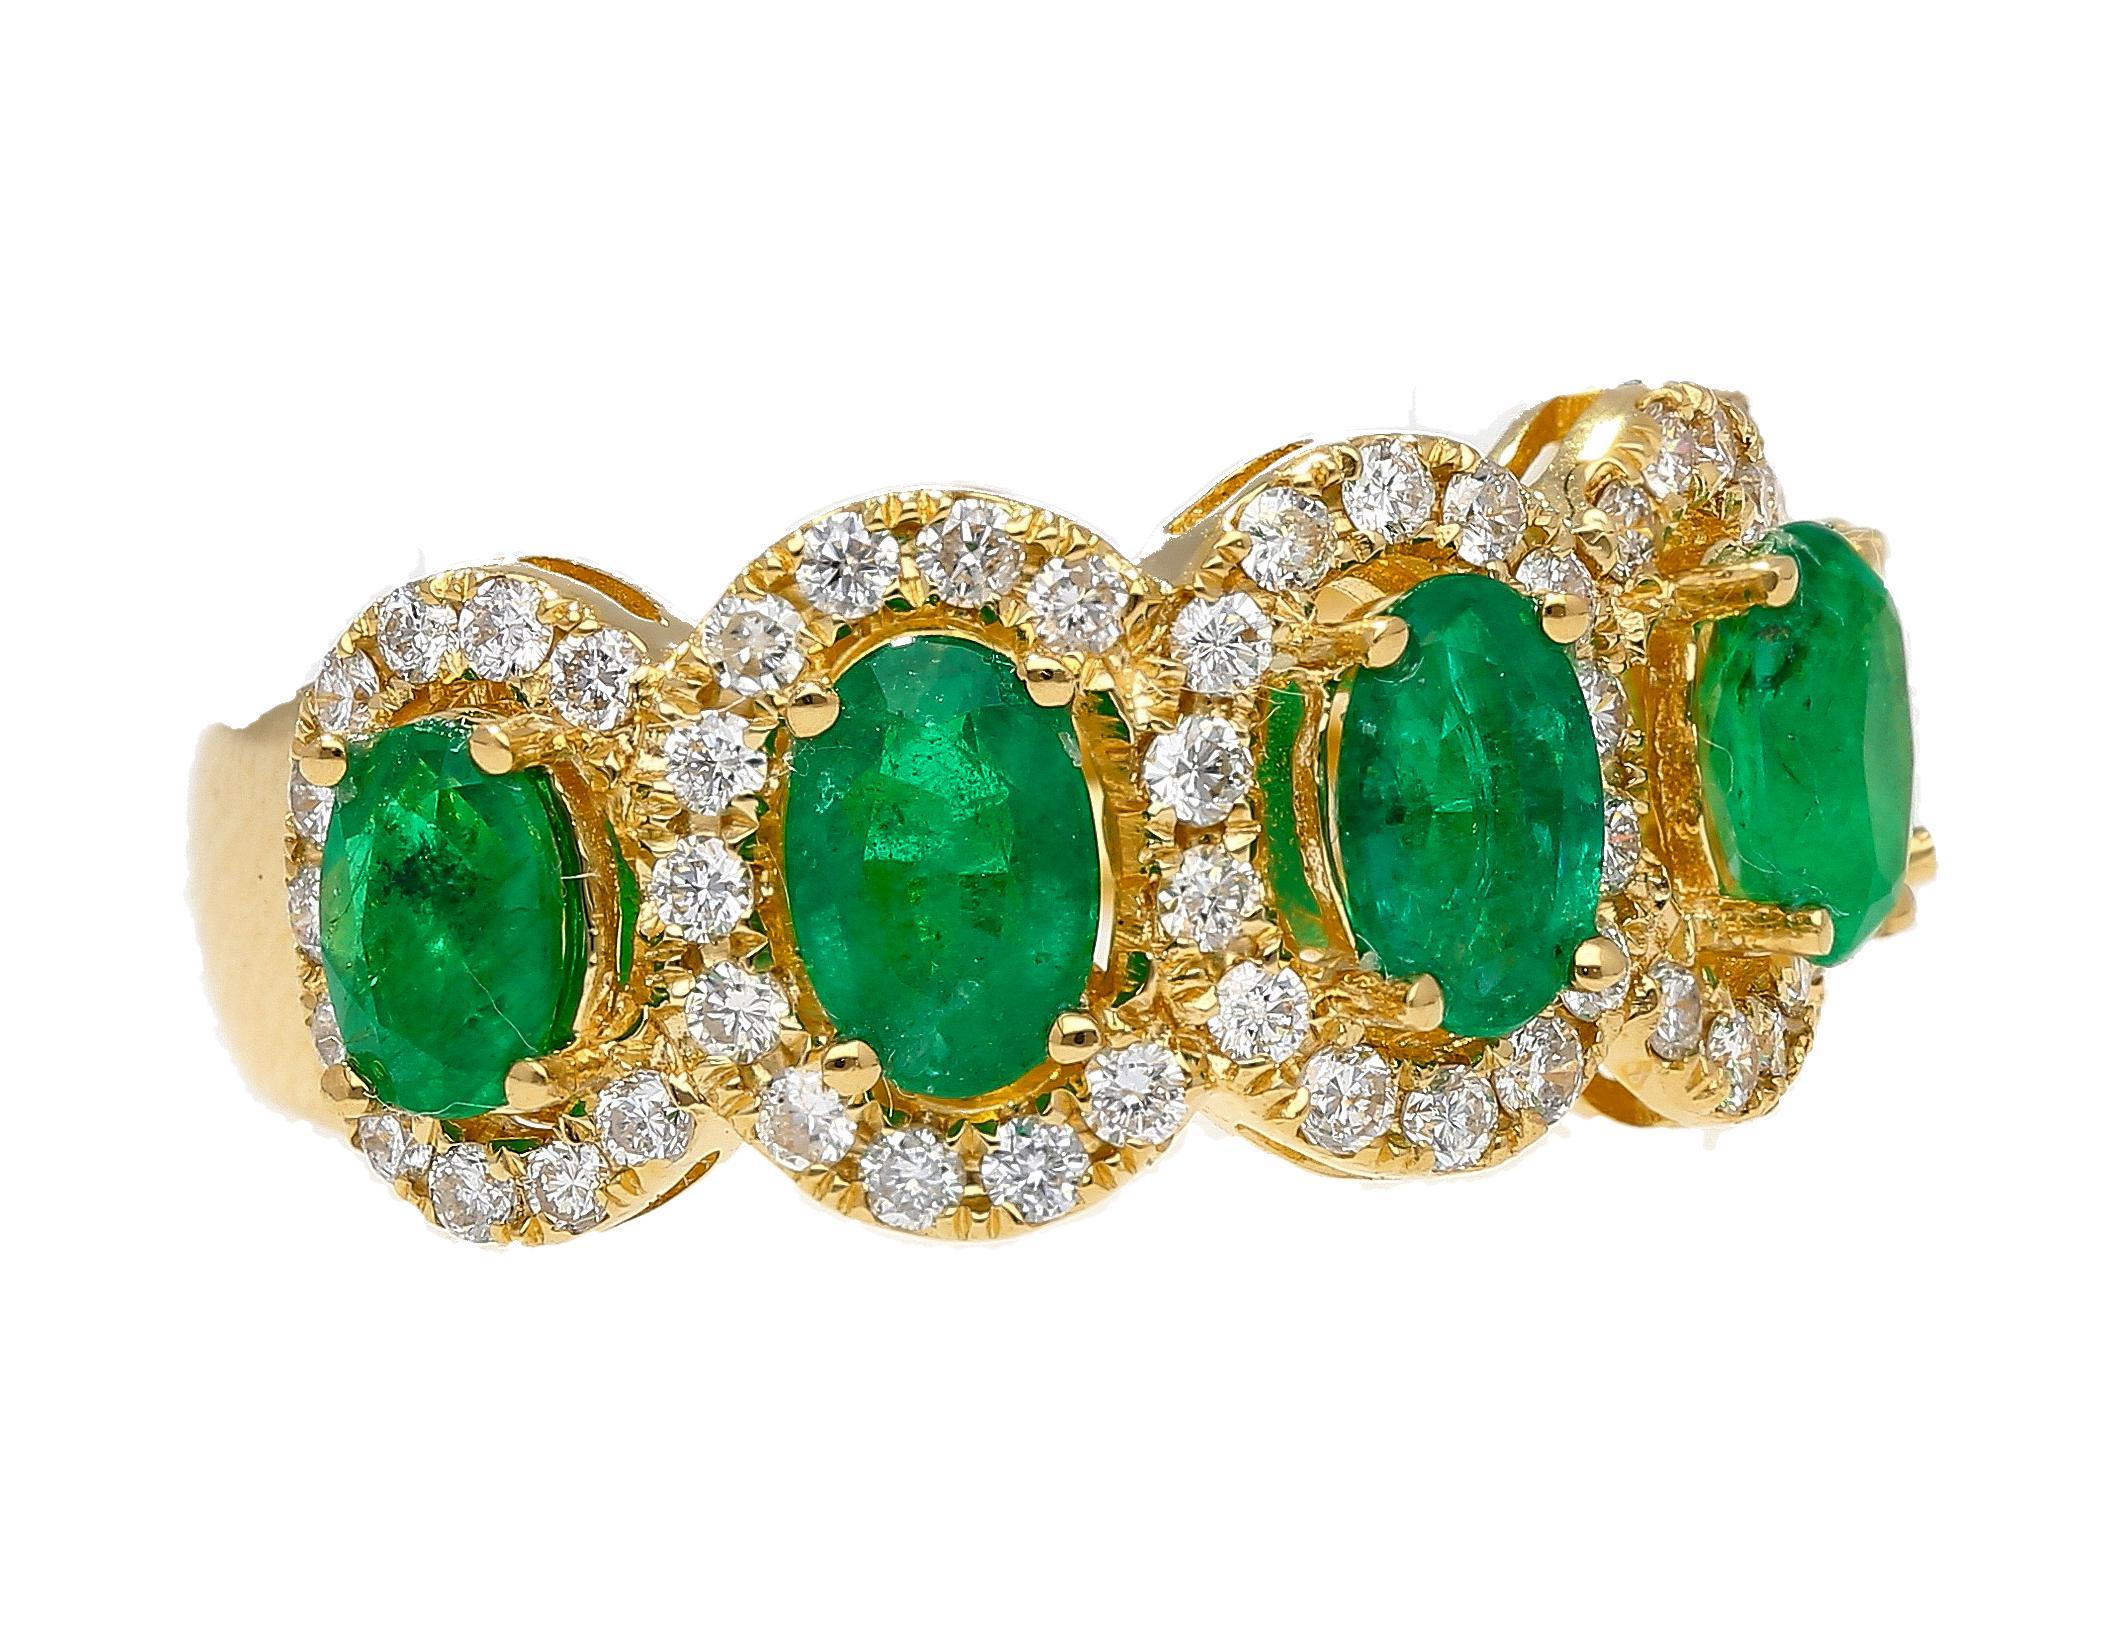 2.29 Carat Oval Cut Emerald and Diamond Wedding Band in 18K Gold For Sale 1